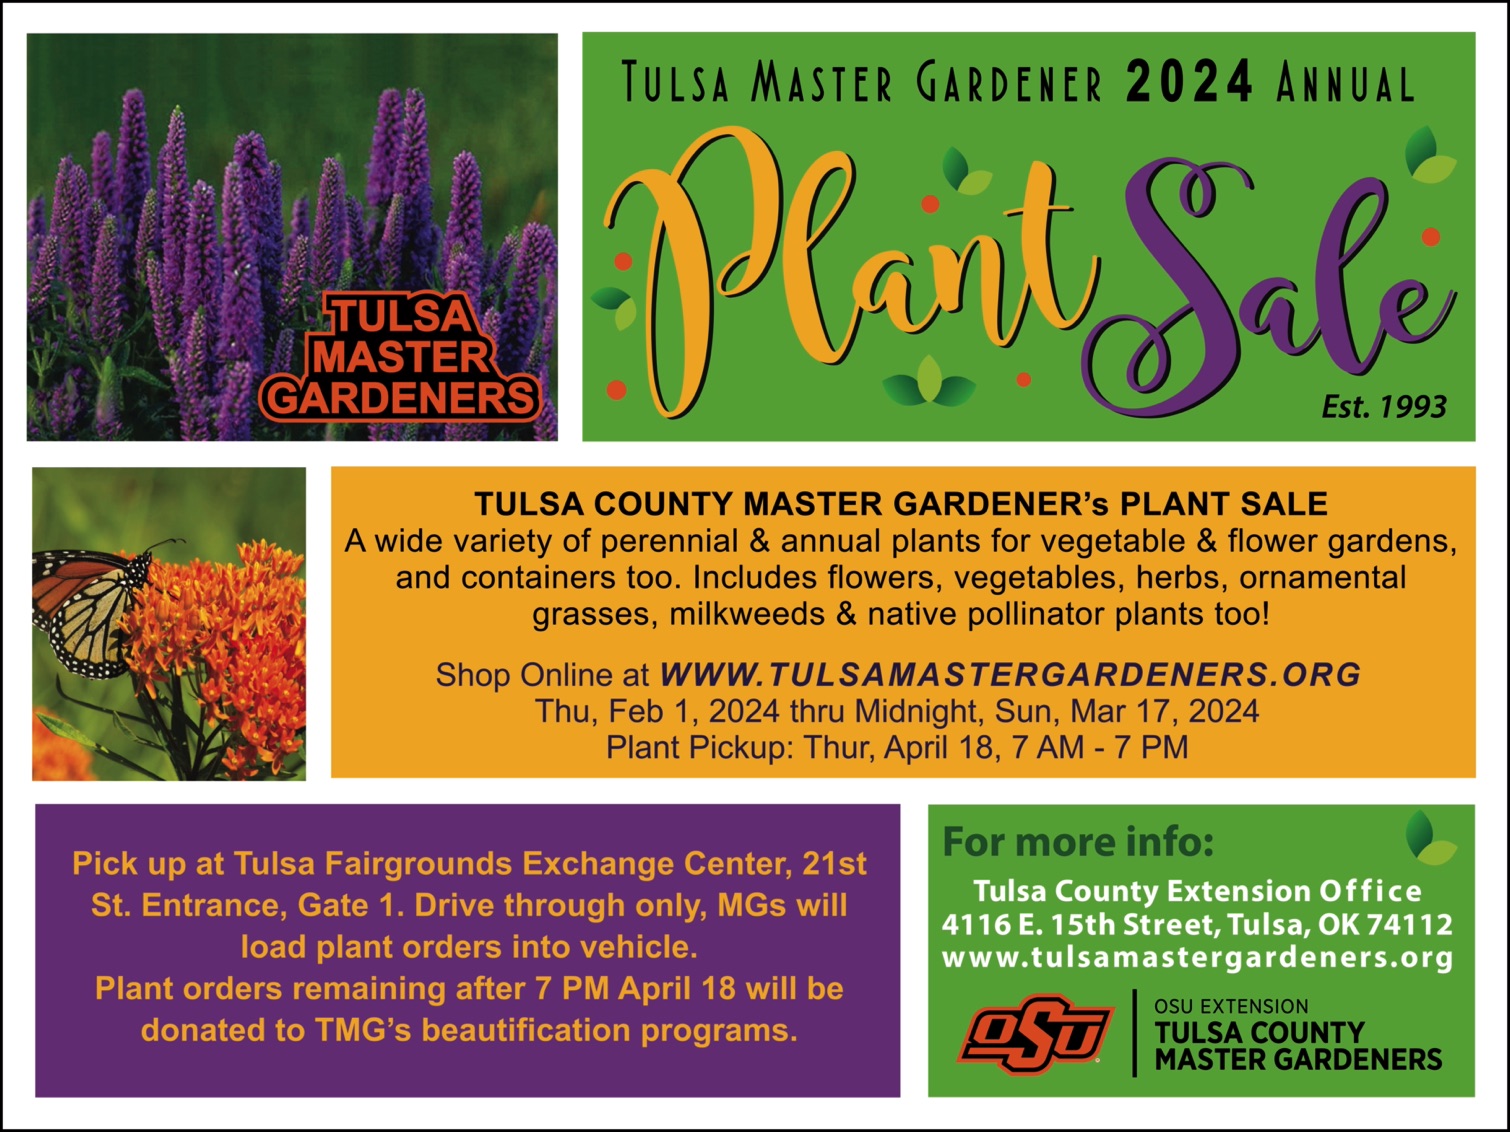 https://www.tulsamastergardeners.org/classes-and-events-2/images/master-gardener-pre-plant-sale/2024%20Plant%20Sale%20POSTER%20Landscape@2x.jpg